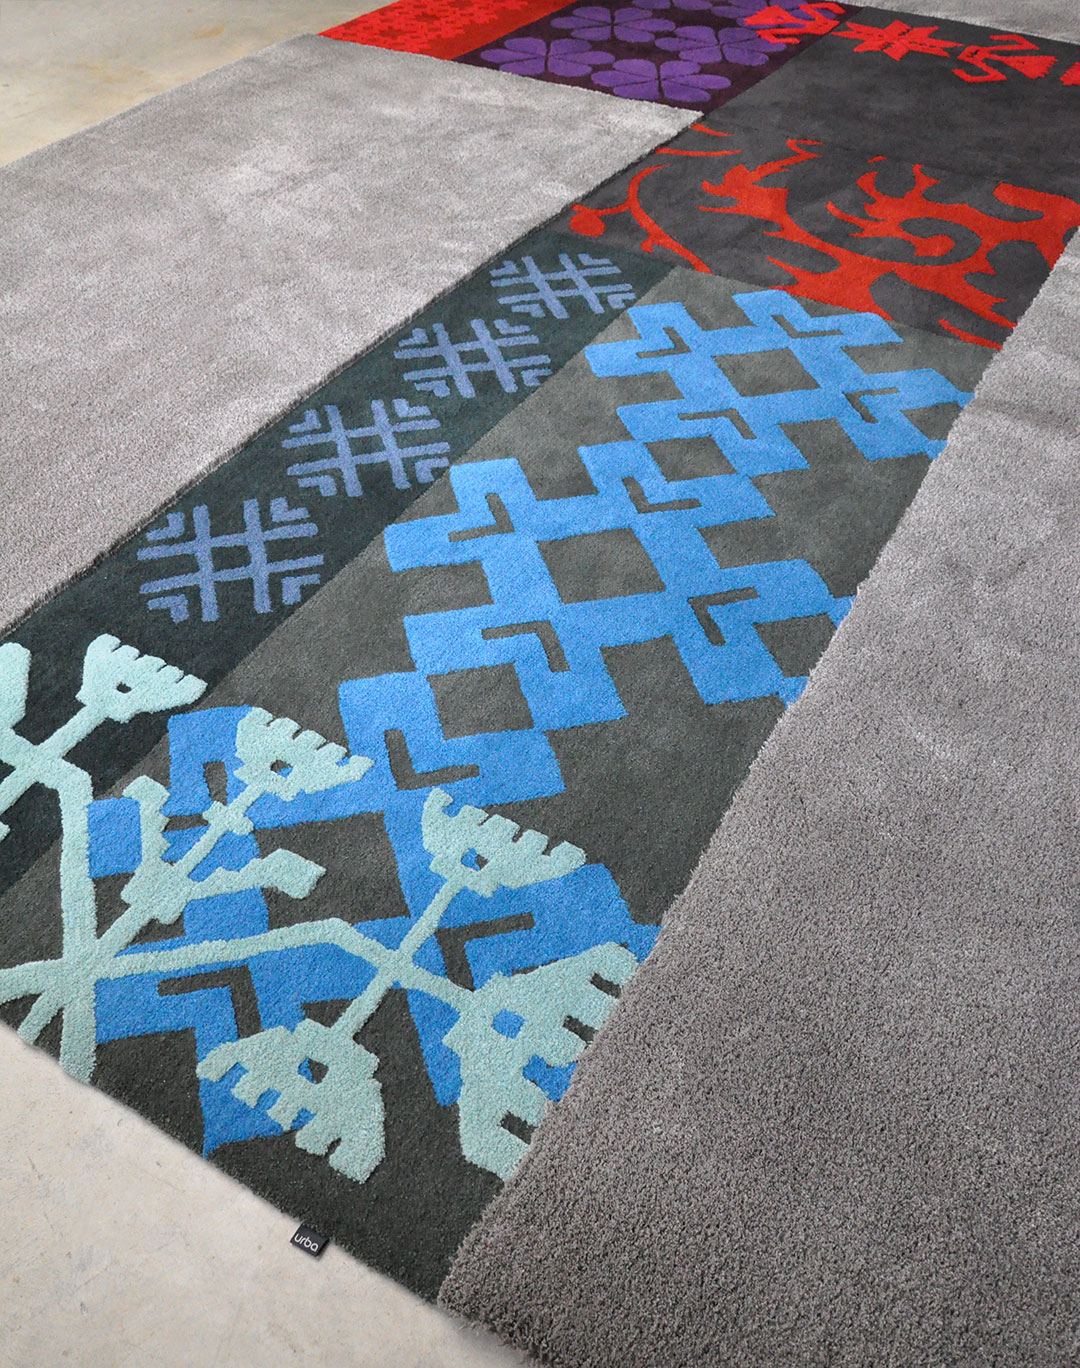 Custom Rug inspired by Sardinian Patterns. Hand Carved Traditional Patterns. | Urba Rugs